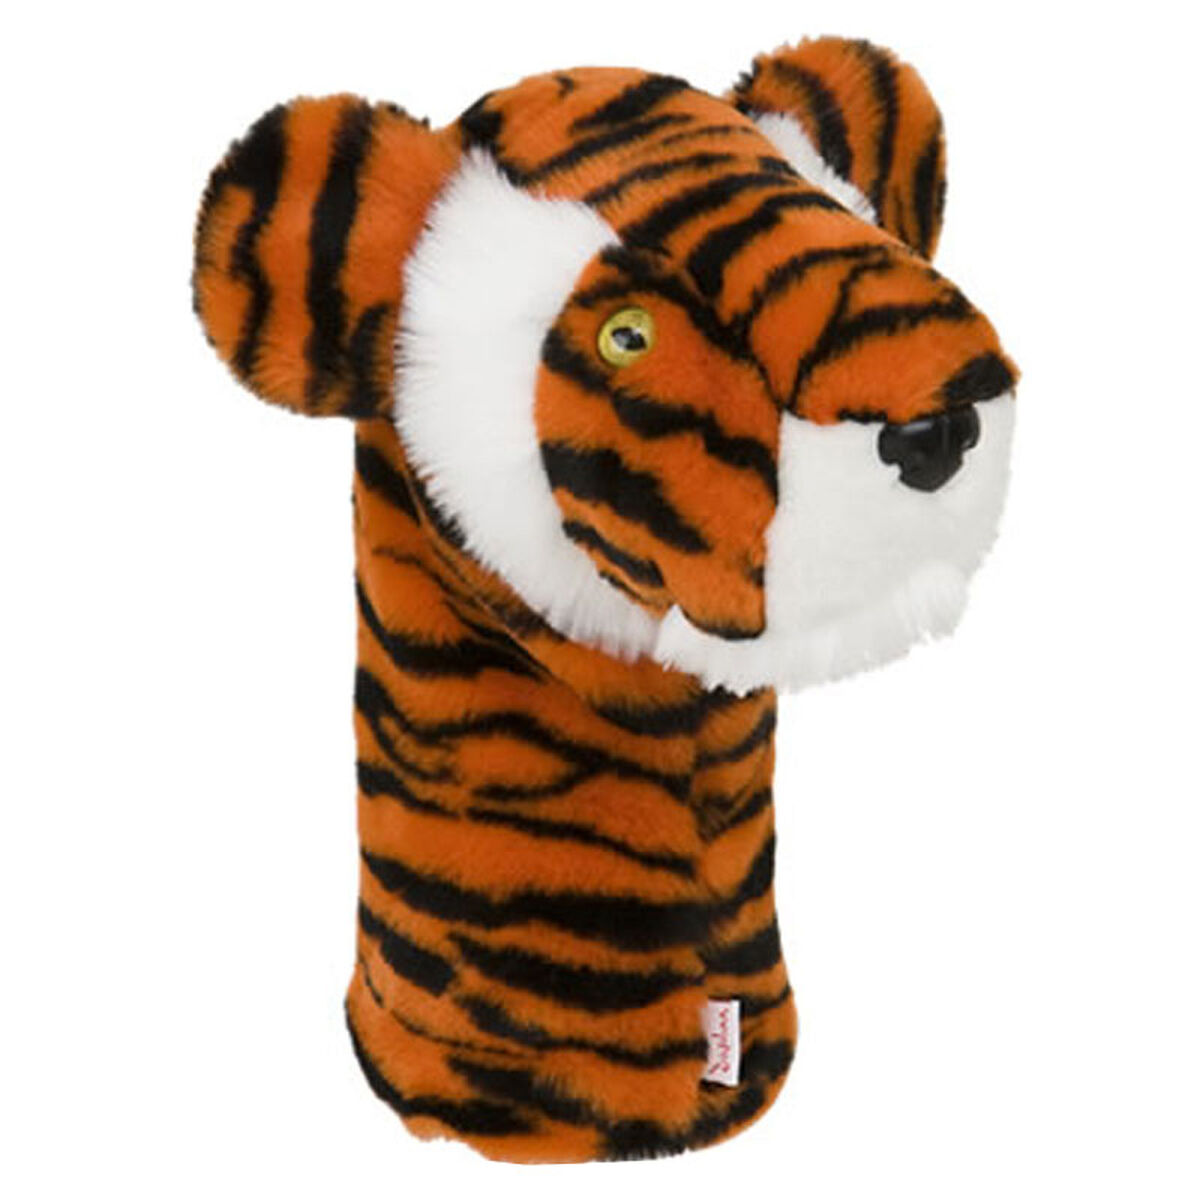 Daphne’s Headcovers Head Cover, Orange and Black Daphnes Tiger, One Size | American Golf